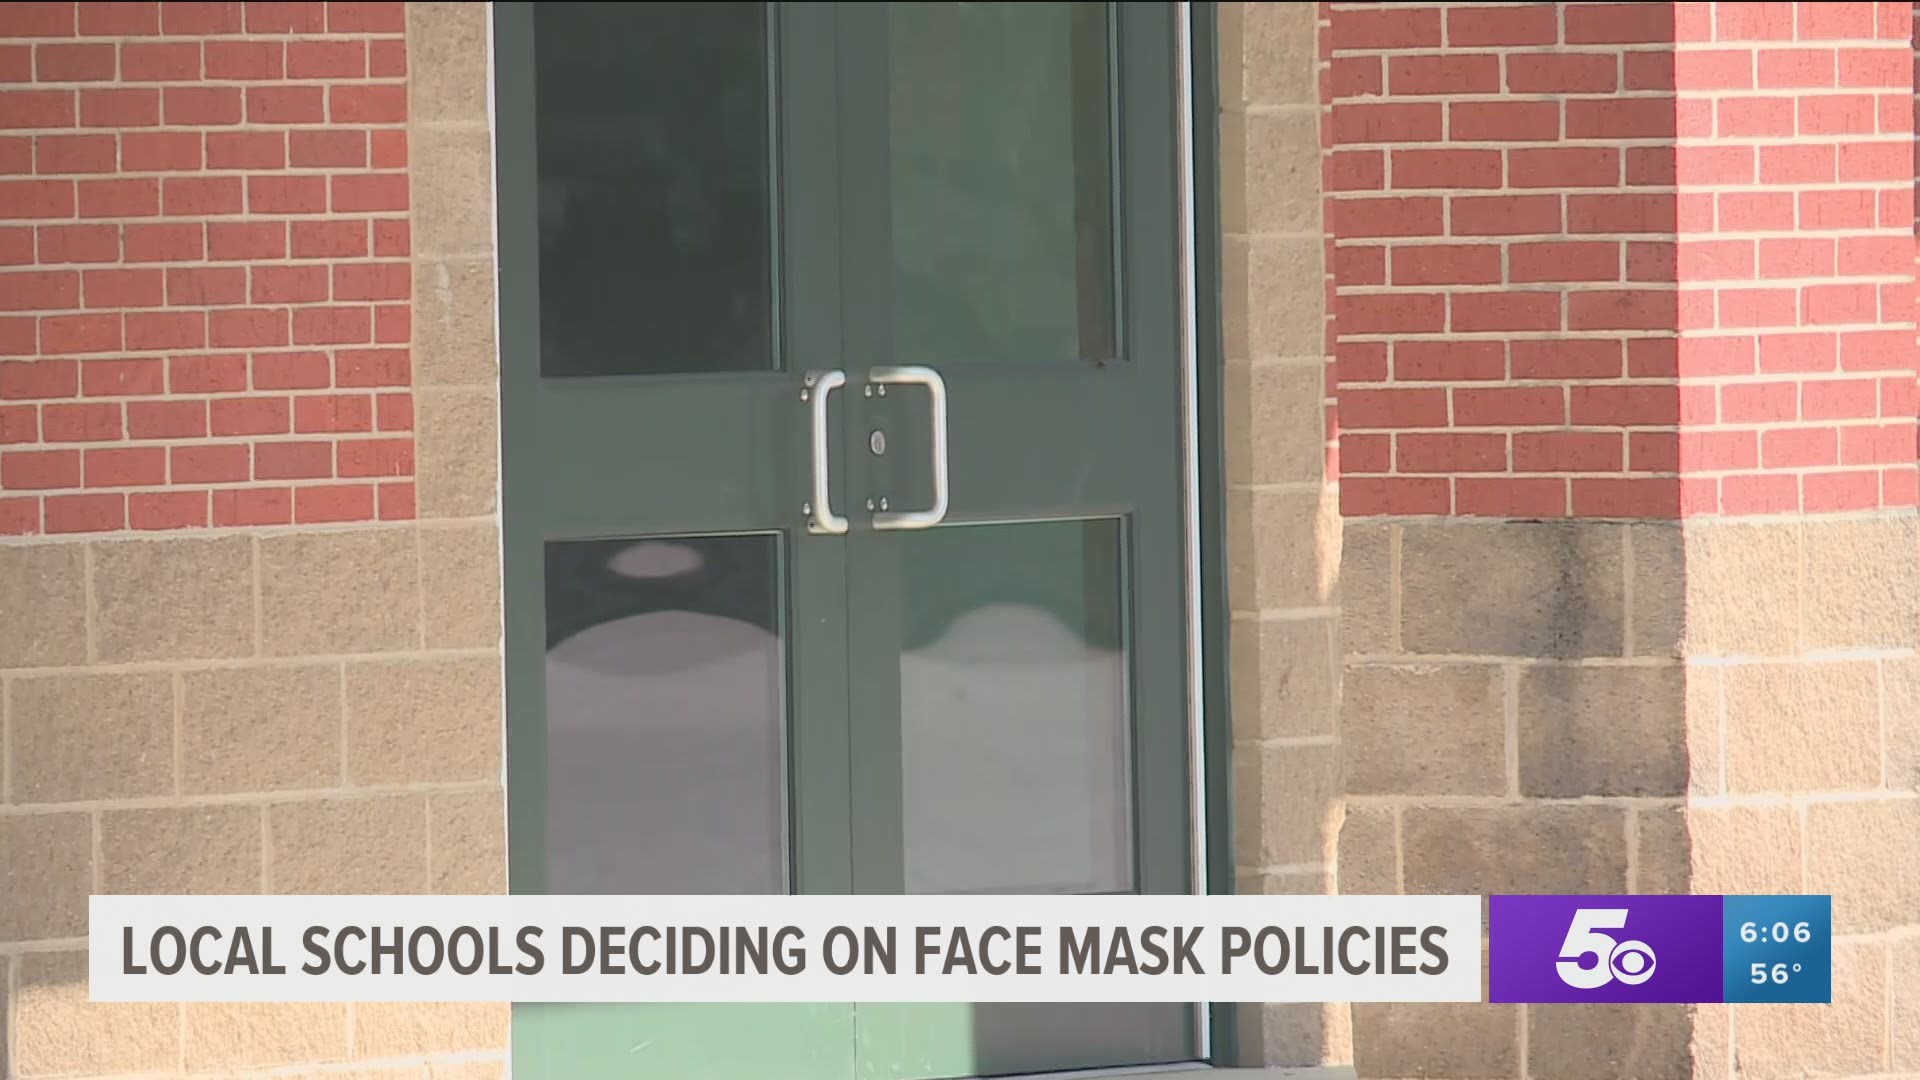 Gov. Hutchinson lifted the statewide mask mandate Tuesday (March 30), but local school districts have decided to keep Covid-19 safety protocols in place for now.